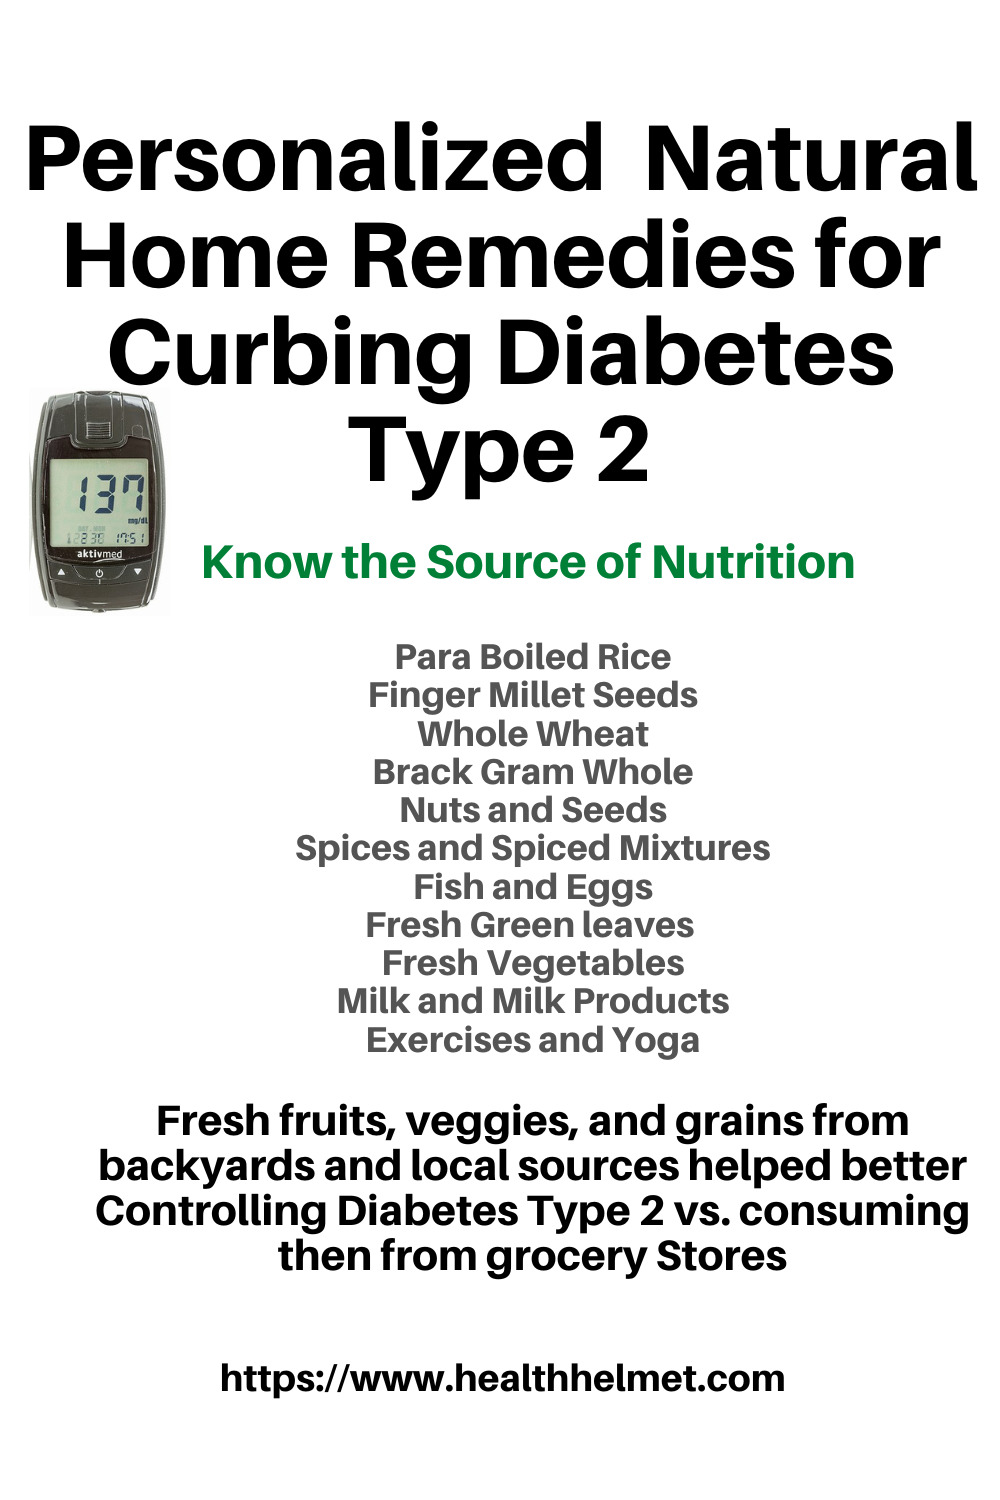 Personalized-Natural-Home Remedies Curbing Diabetes Type 2- Know-the-source-of-Nutrition